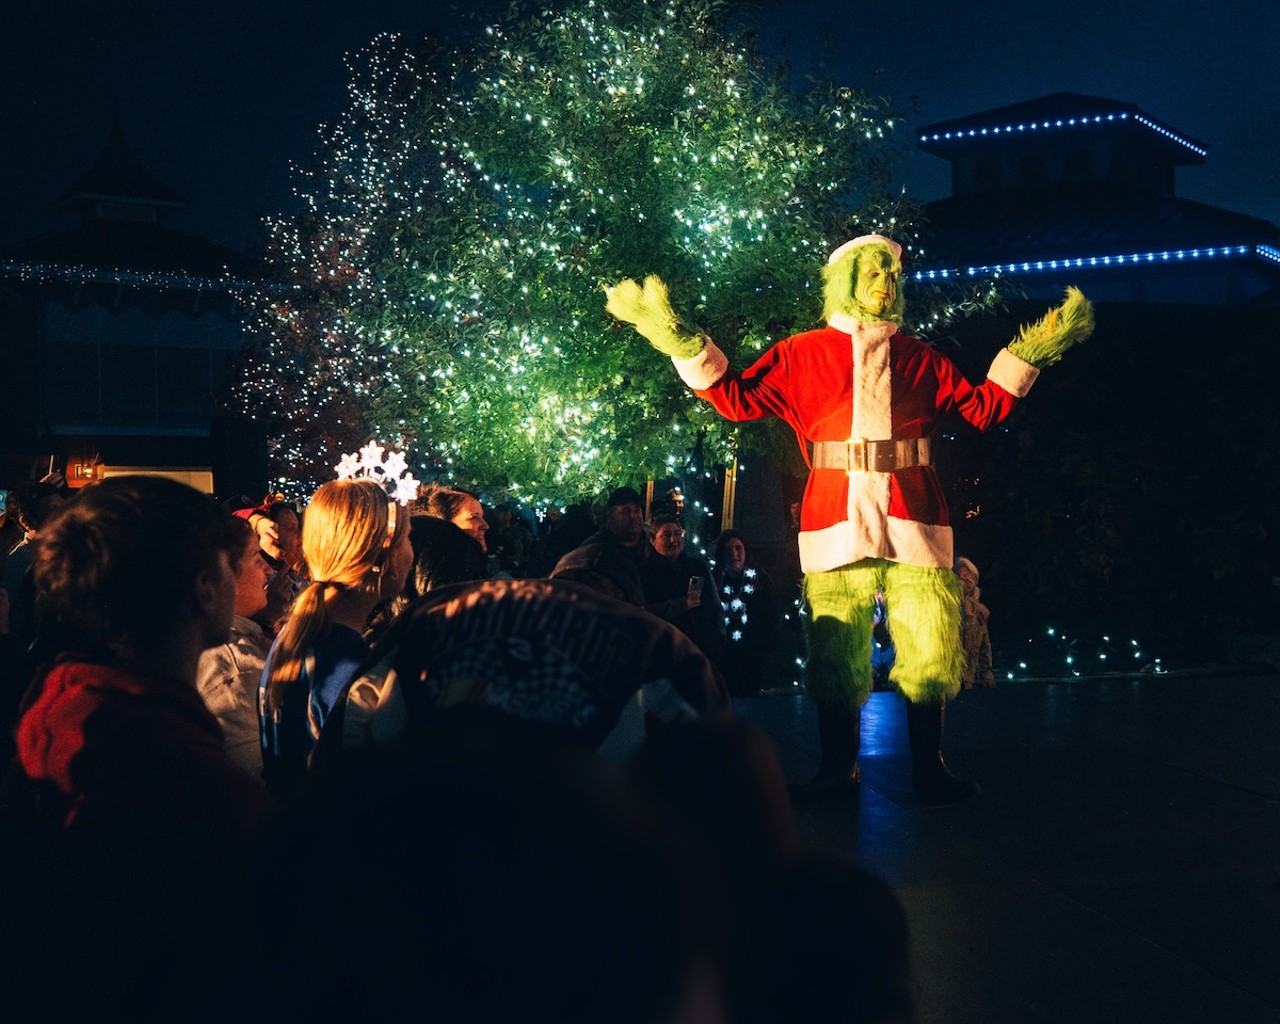 PNC Festival of Lights Preview Night at the Cincinnati Zoo and Botanical Garden on Nov. 16, 2023